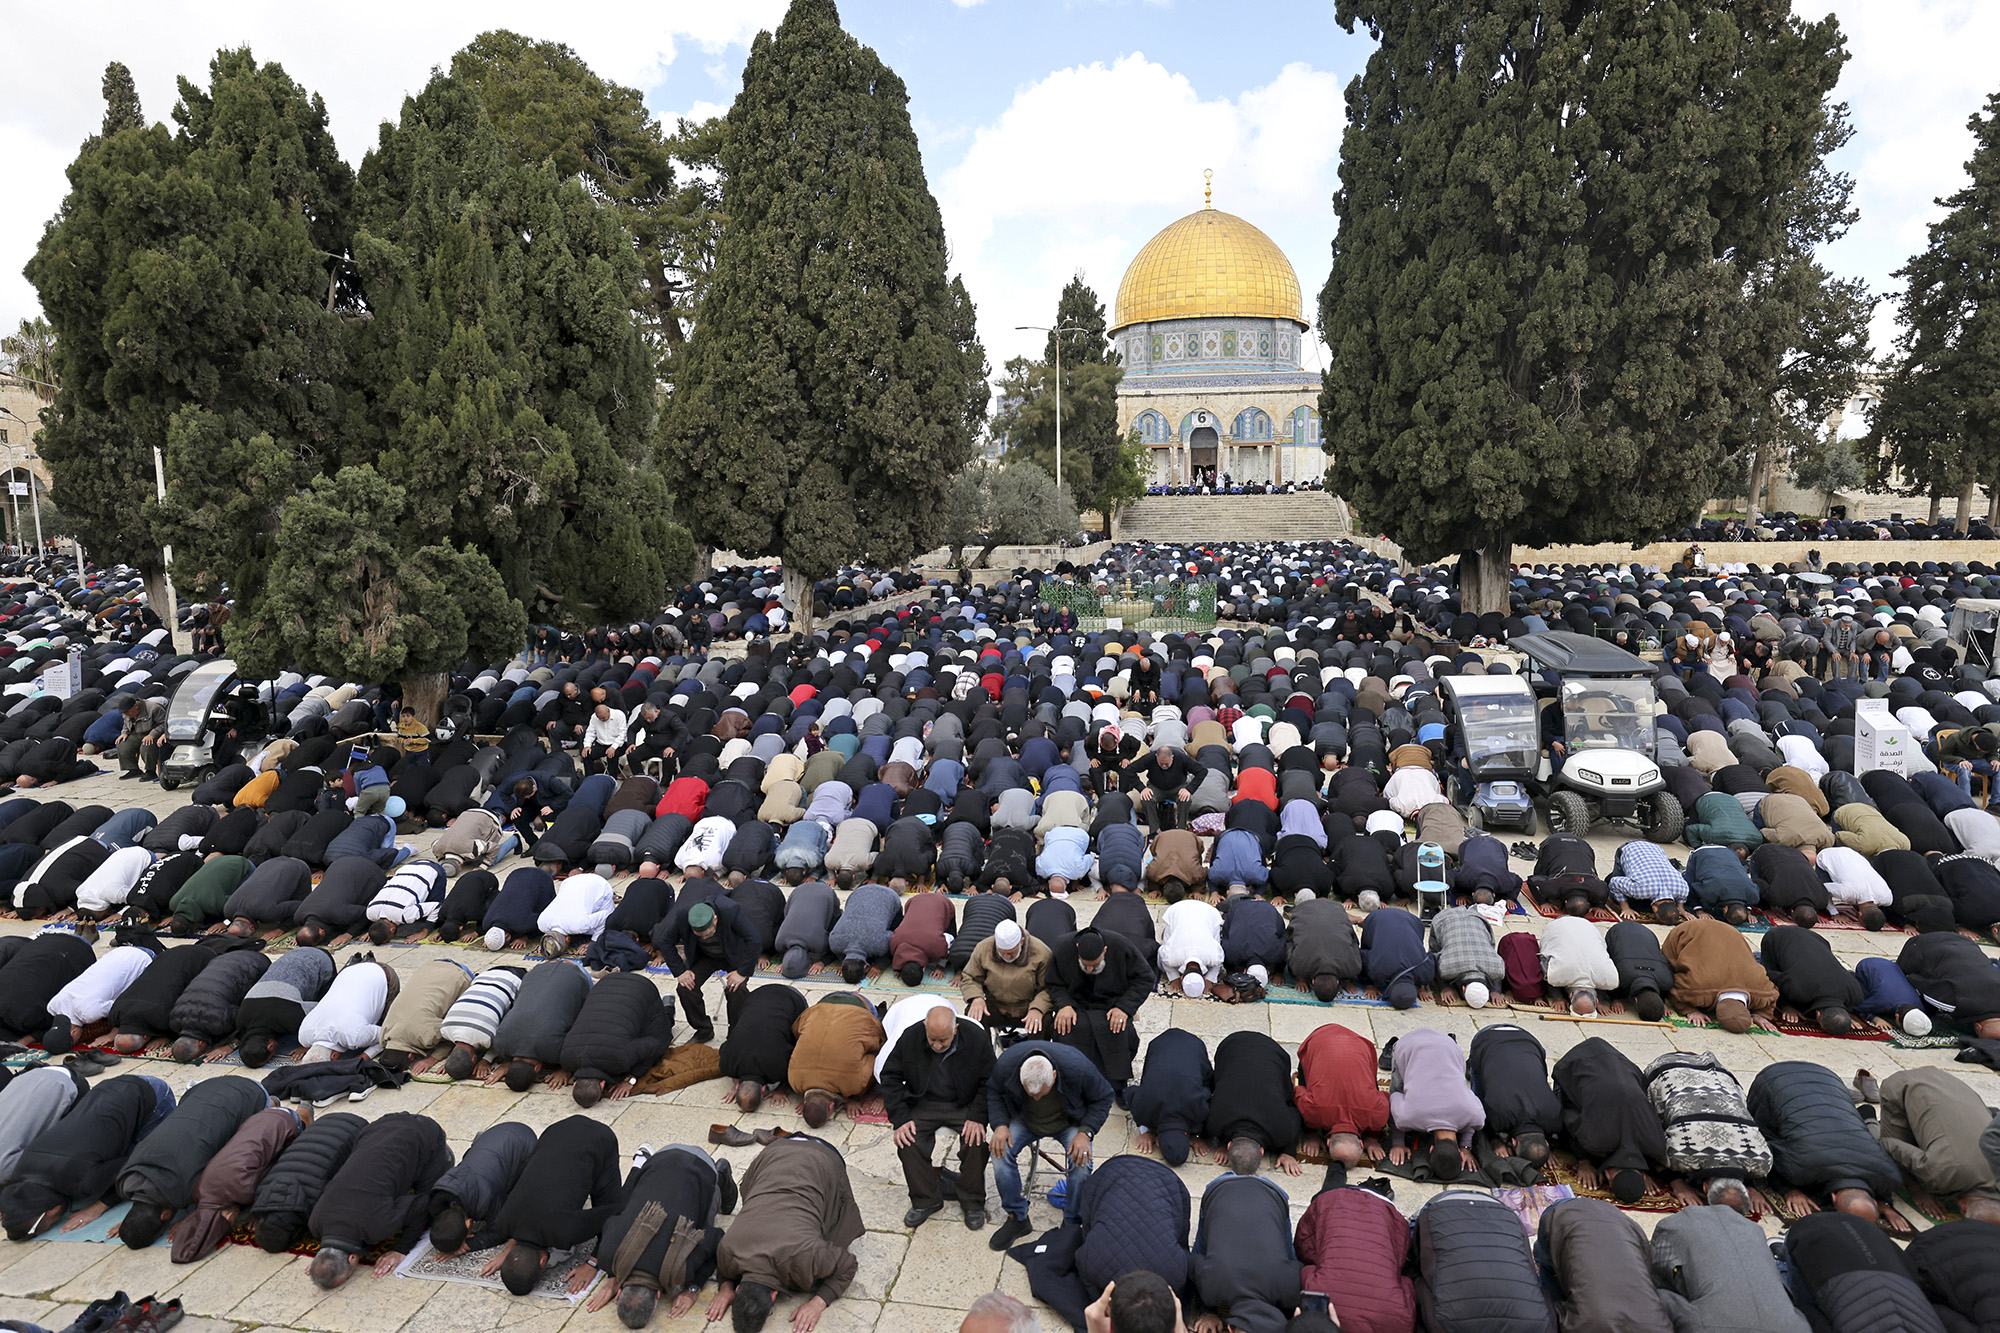 Muslim devotees offer first Friday noon prayers of the Islamic holy fasting month of Ramadan against the backdrop of the Dome of the Rock at the compound of the Al-Aqsa mosque in the Old City of Jerusalem on March 15.